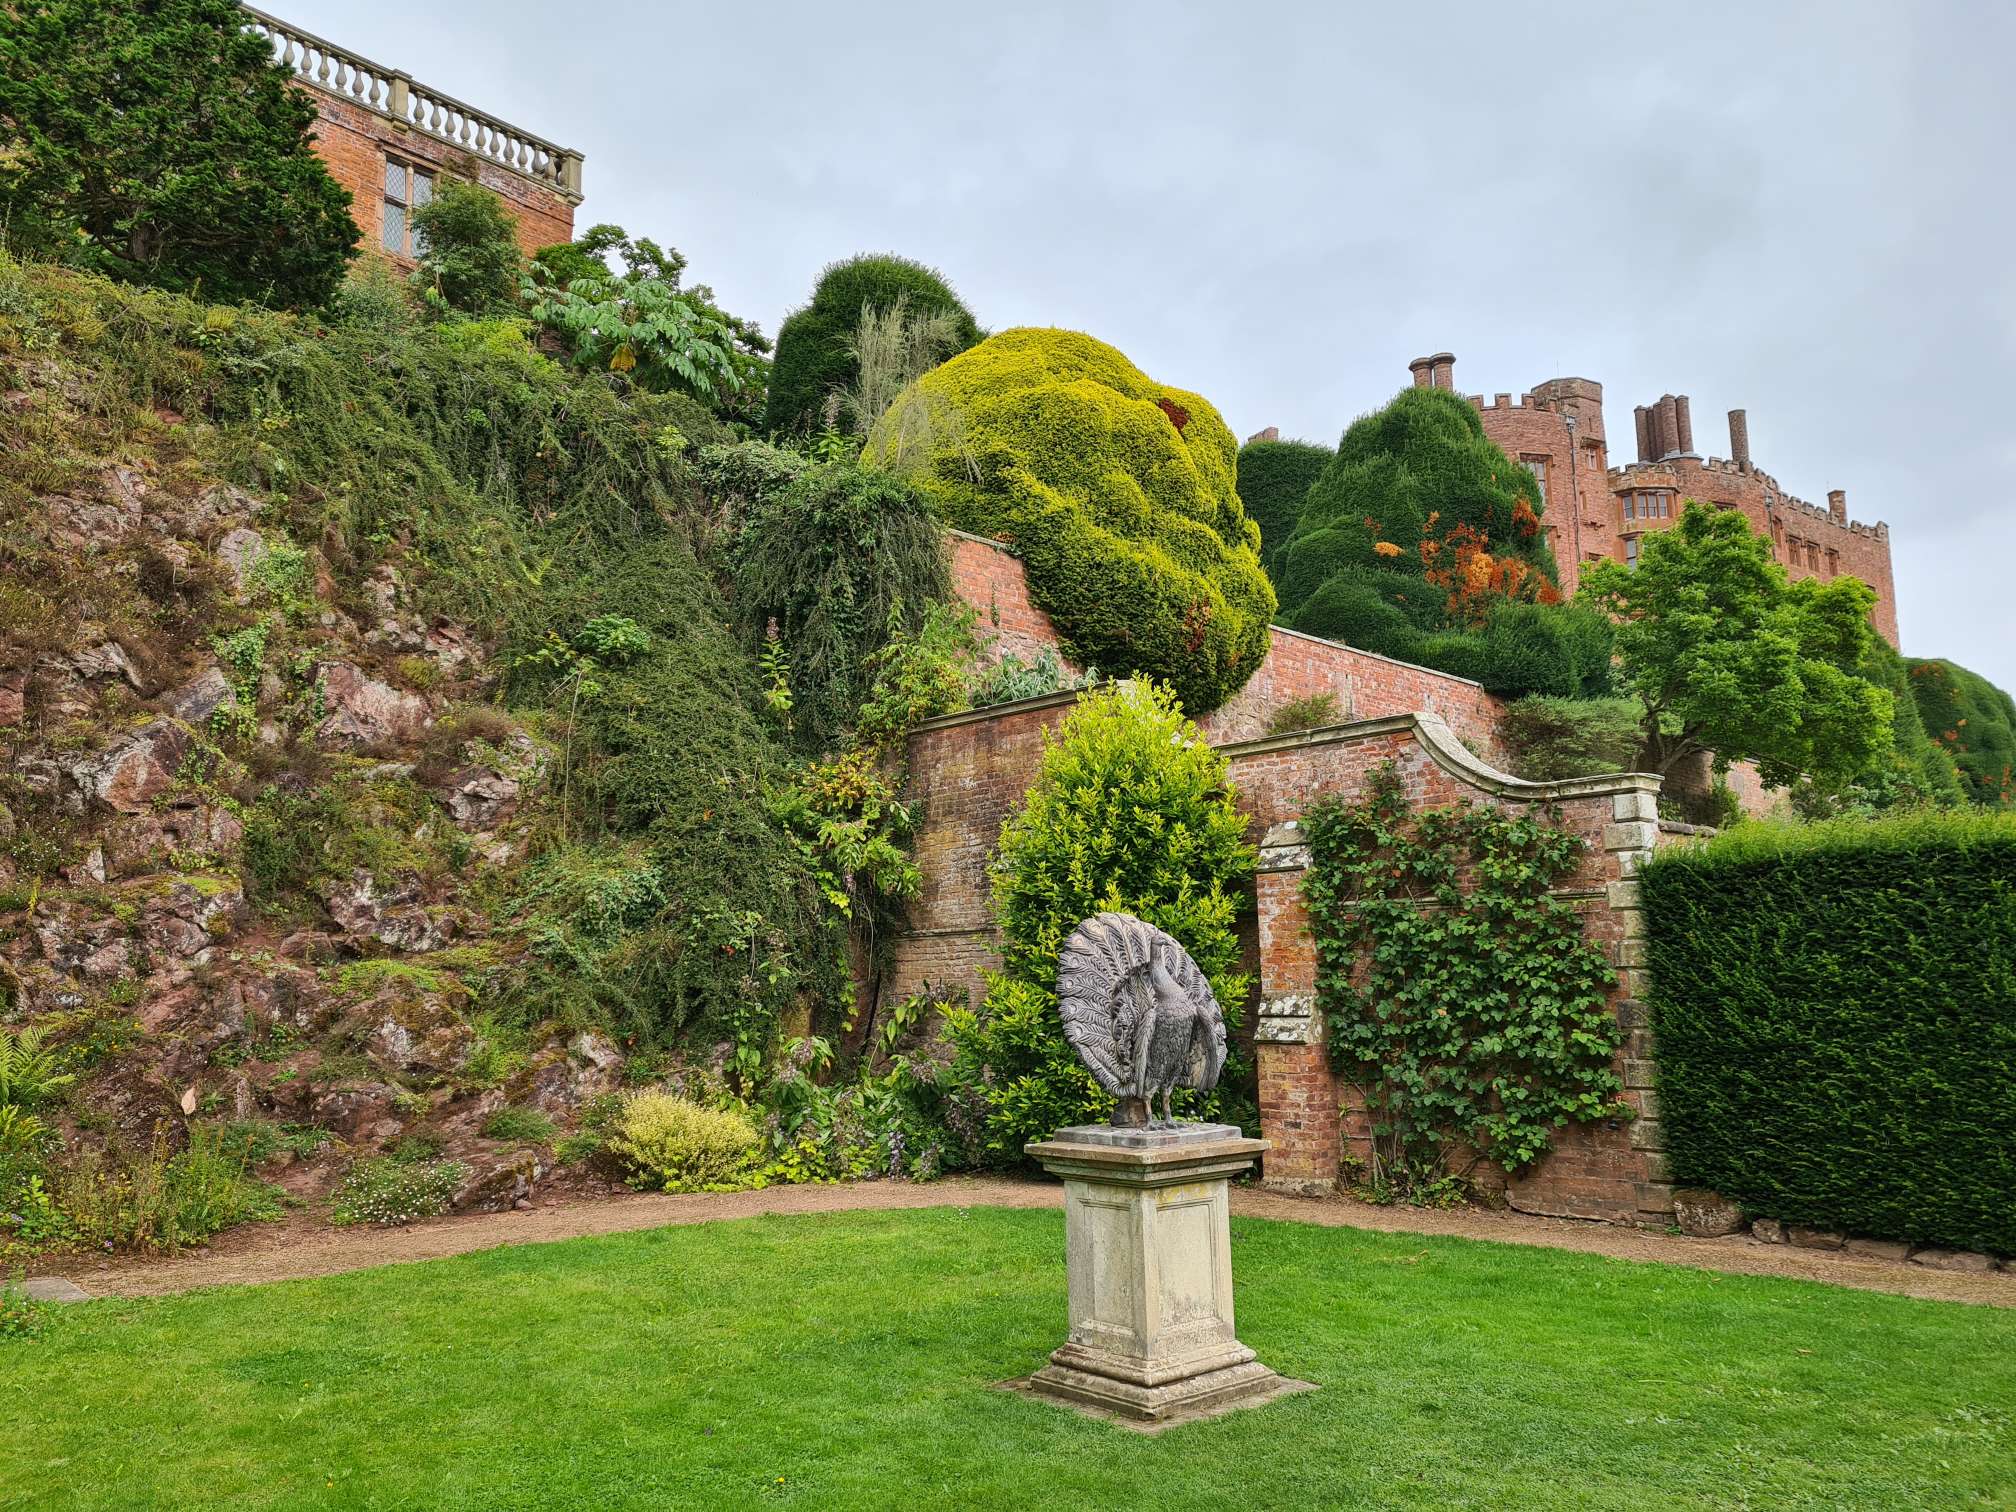 A peacock statue in Powis Castle garden with the castle showing in the rear of the picture